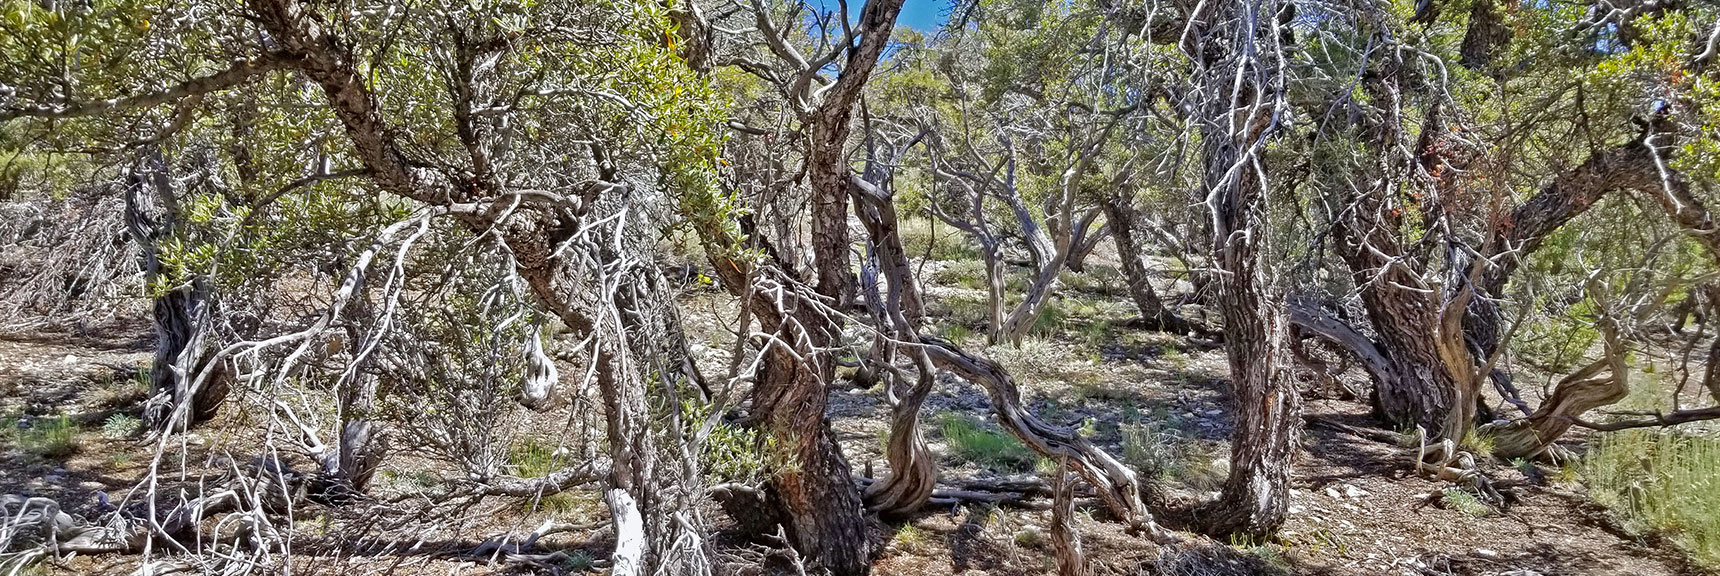 Brush Never Gets Thicker Than This. Easy to Weave Through Openings | Black Rock Sister | Mt Charleston Wilderness | Lee Canyon | Spring Mountains, Nevada